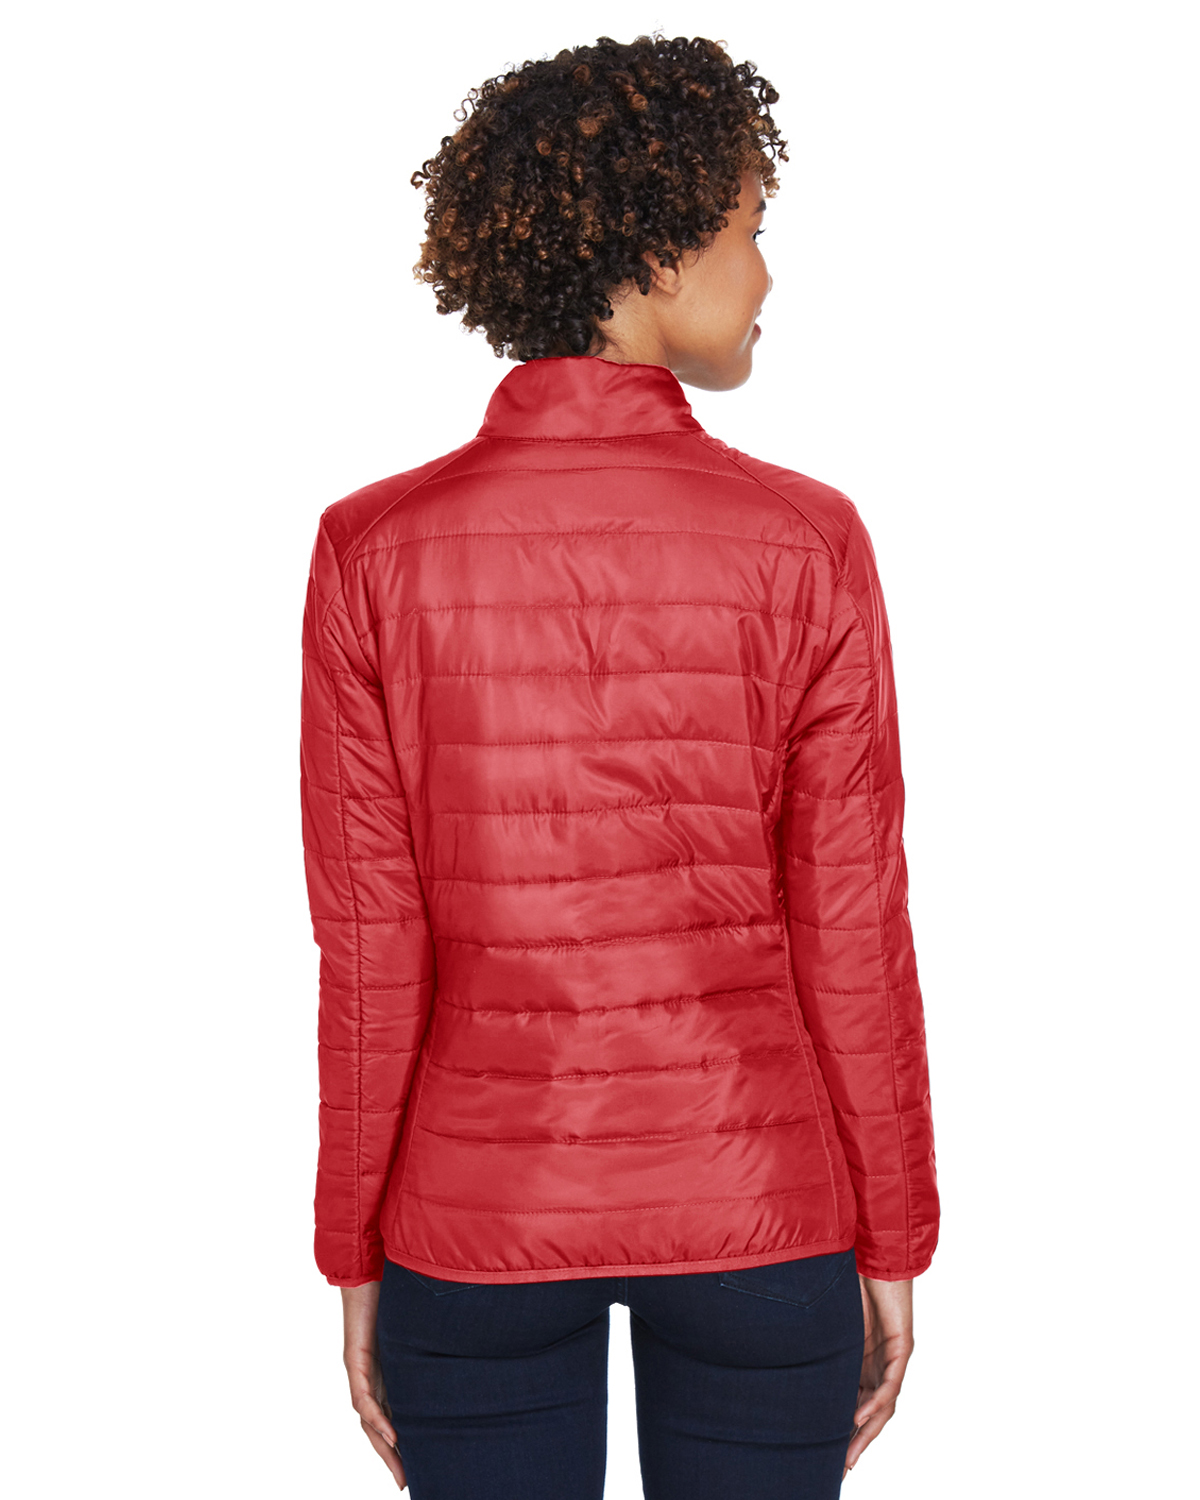 Ladies' Prevail Packable Puffer Jacket - CLASSIC RED - L - image 2 of 3